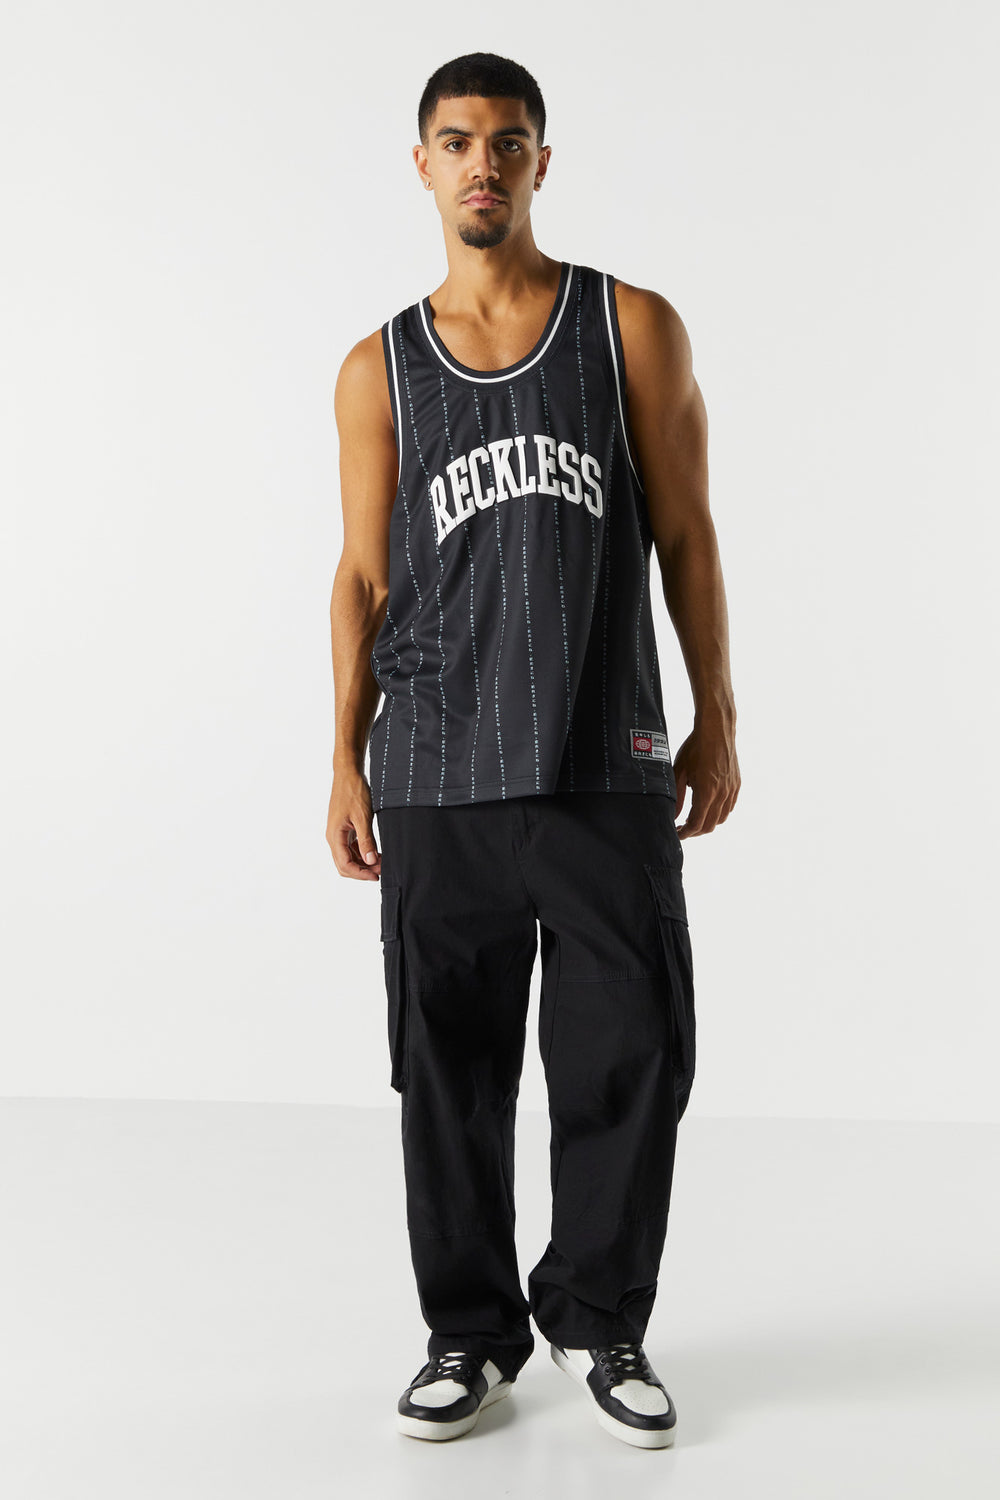 Reckless Graphic Basketball Jersey Reckless Graphic Basketball Jersey 3